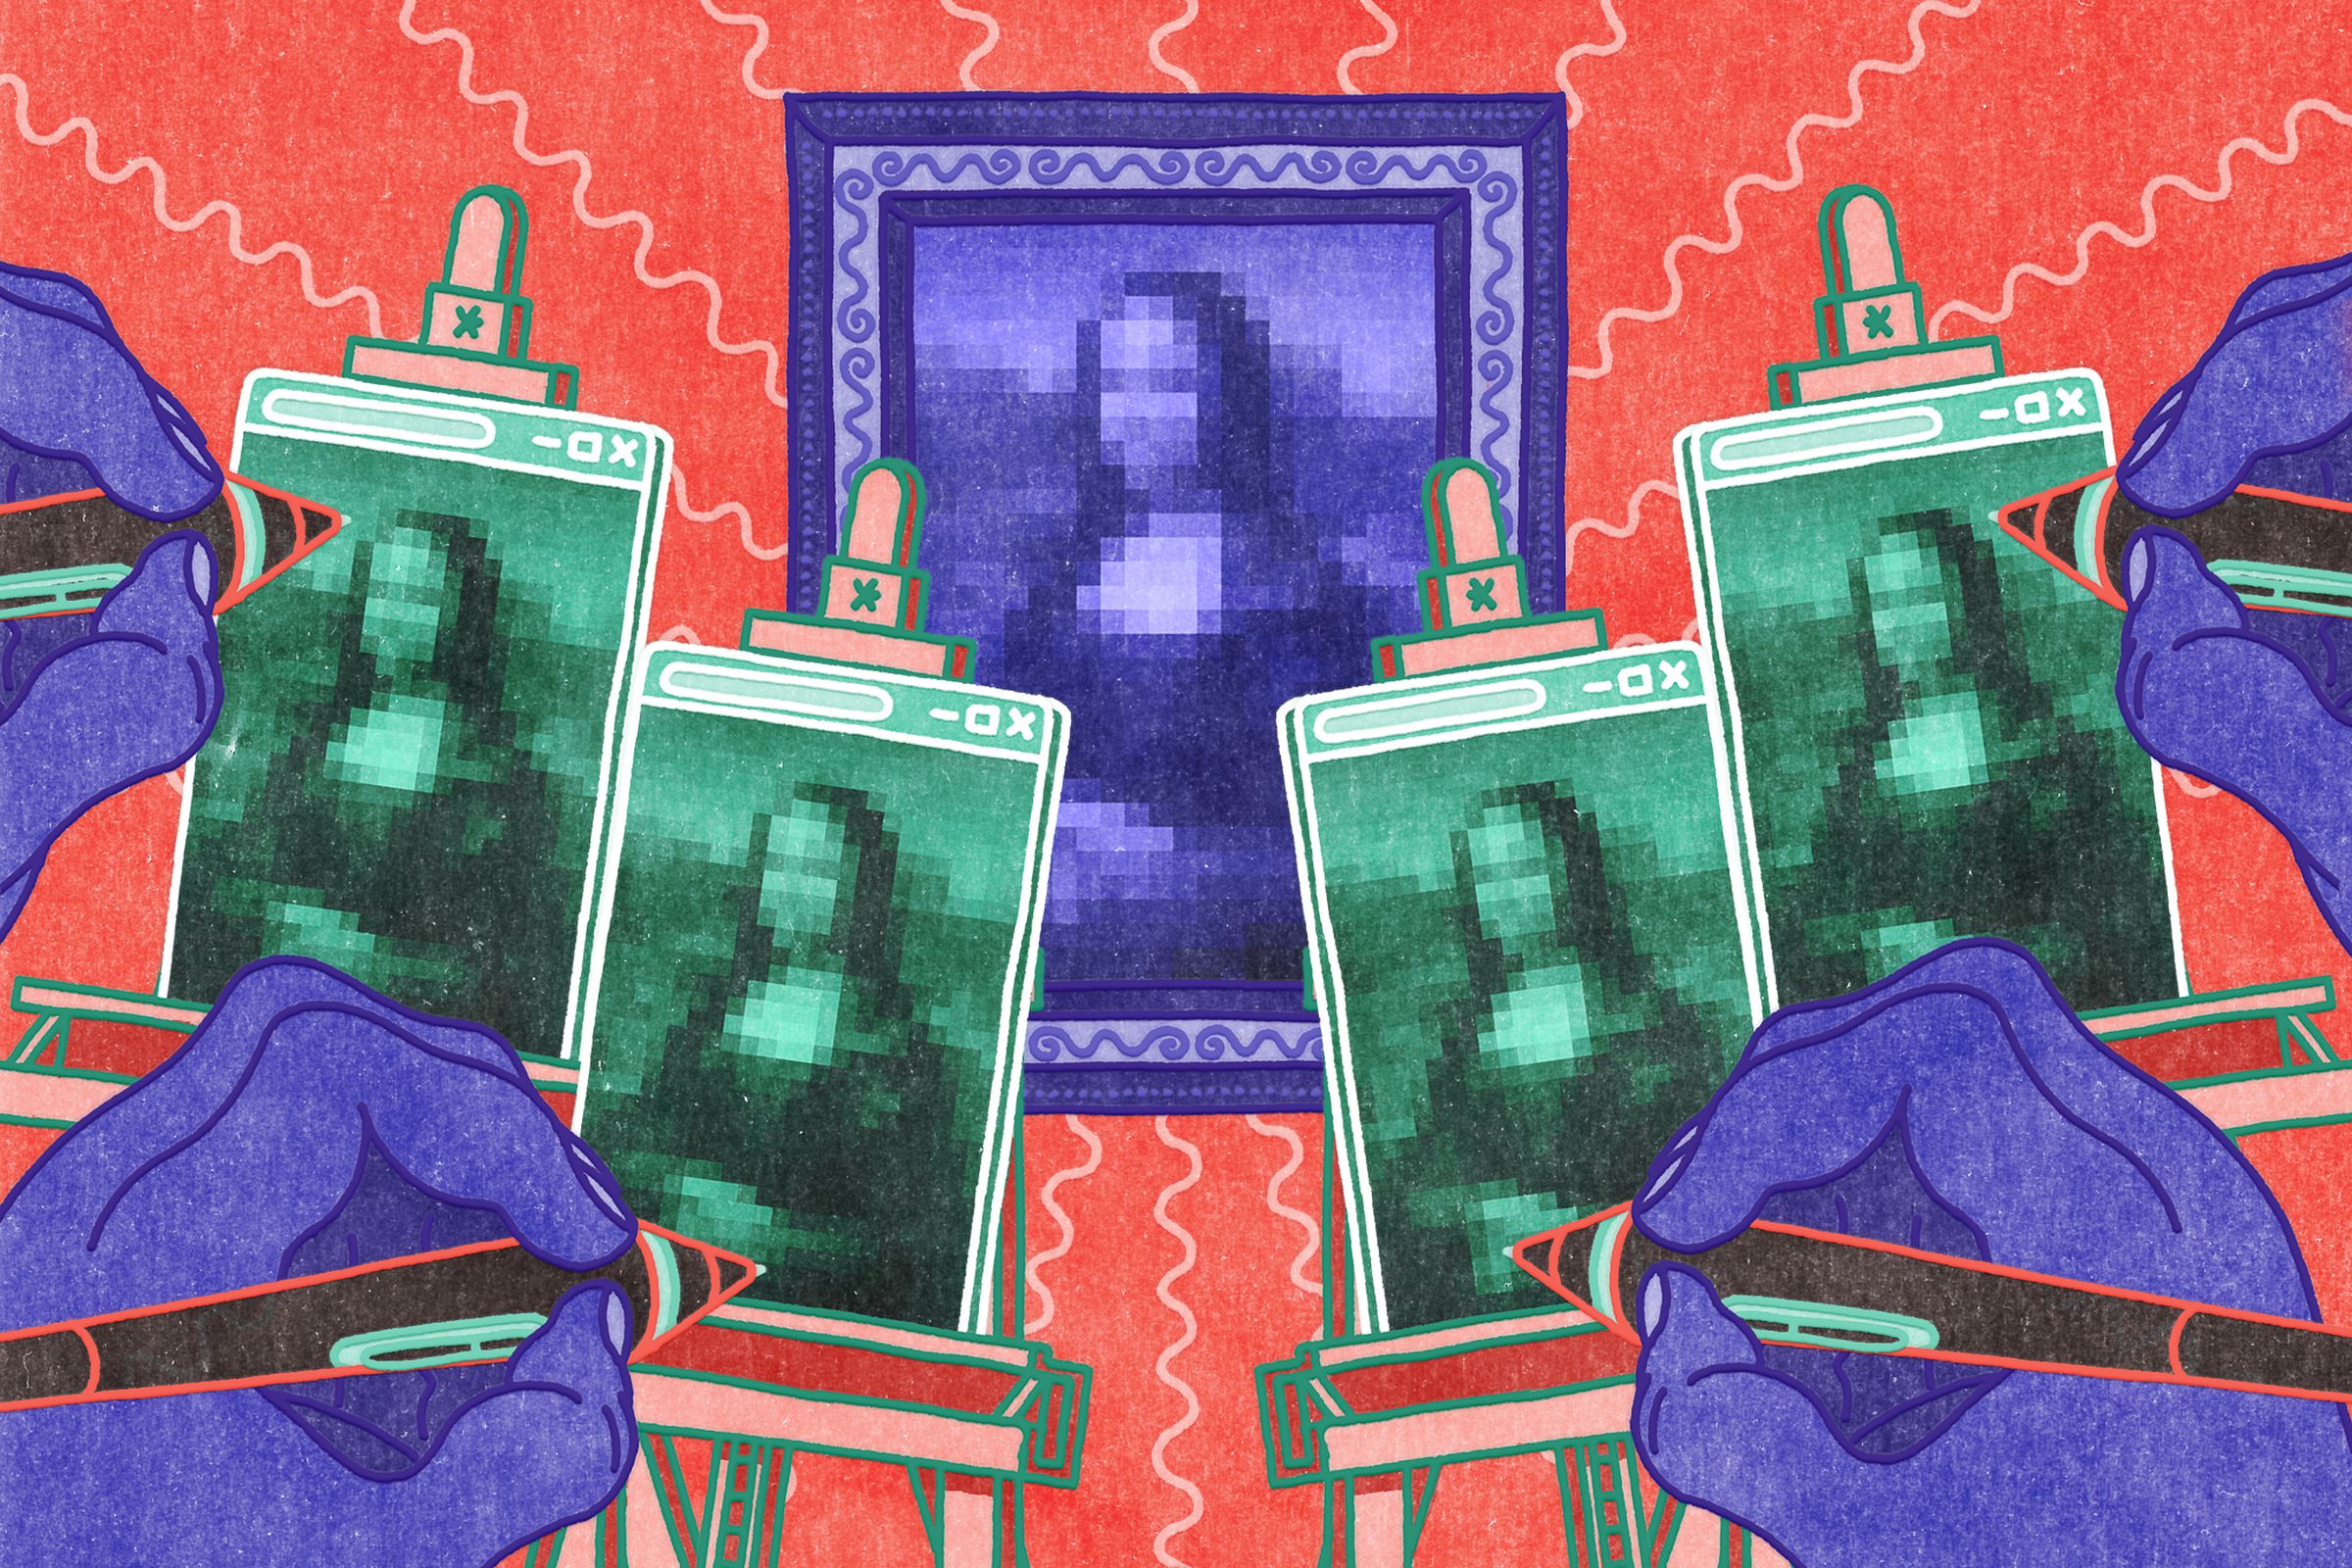 A stylized illustration of artists all copying the same pixelated Mona Lisa.